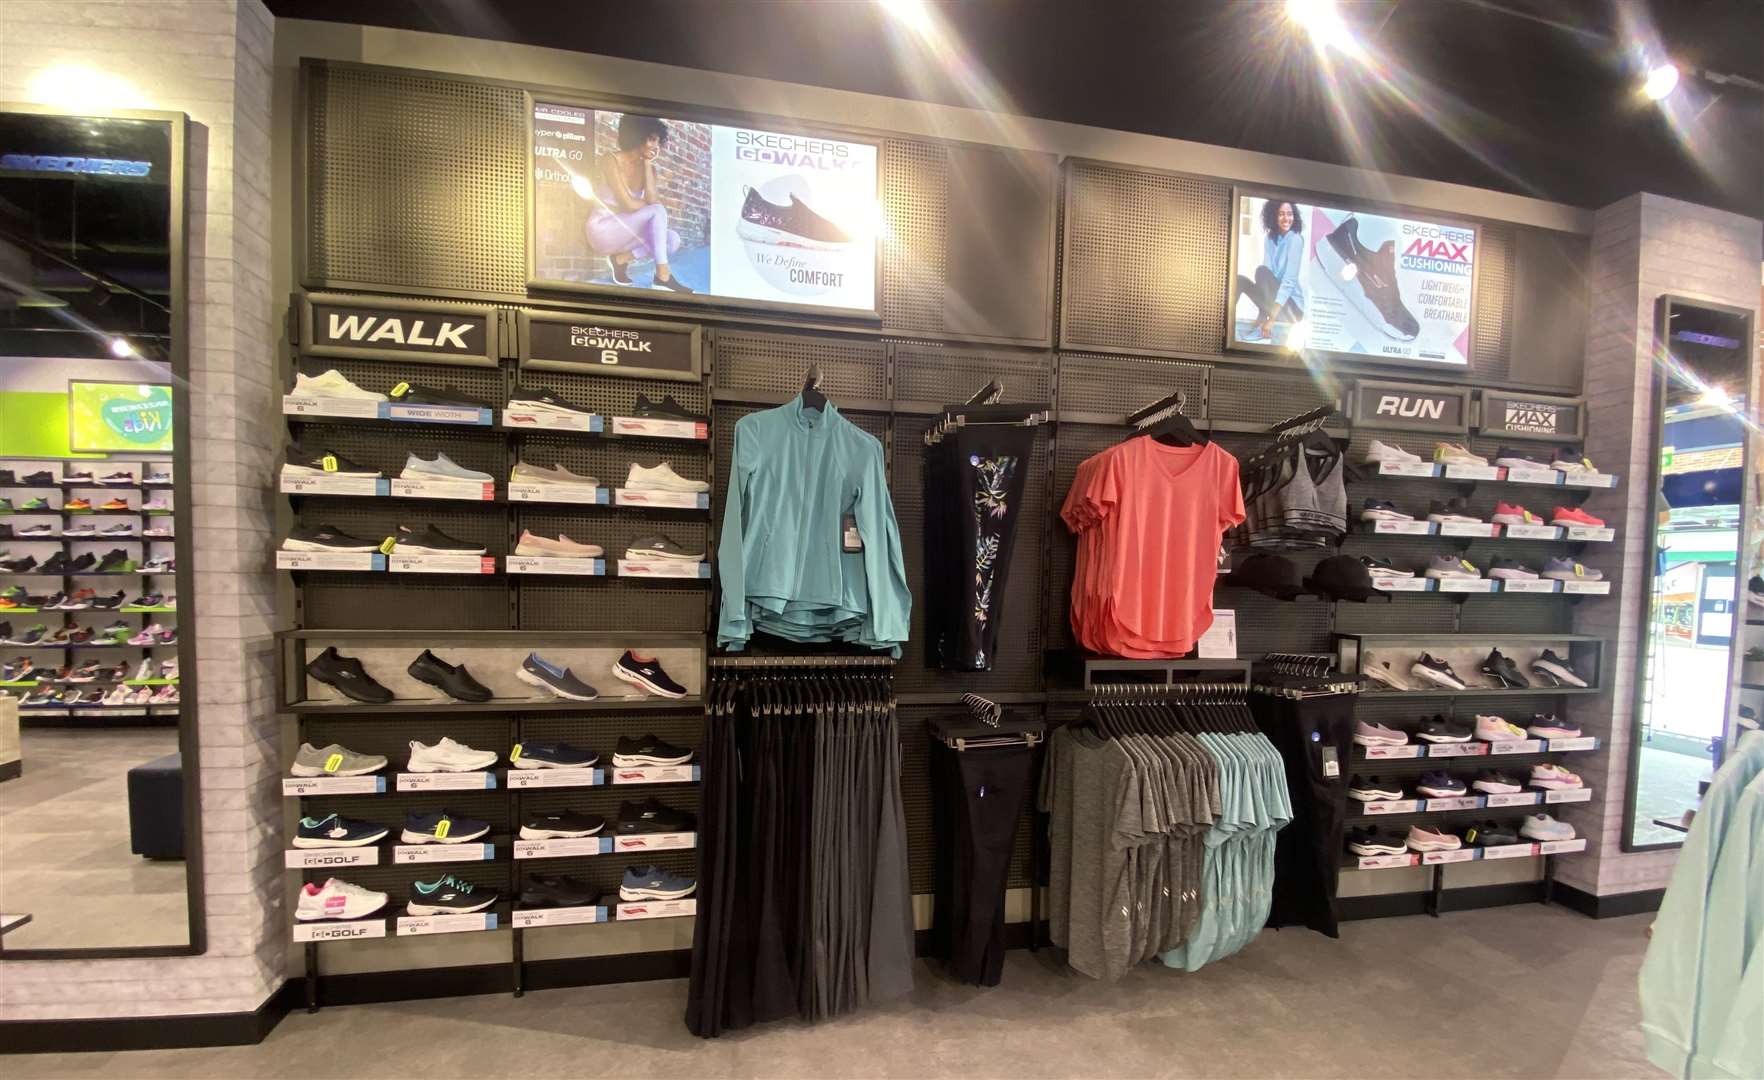 It sells a range of athletic footwear and apparel. Picture: Fremlin Walk